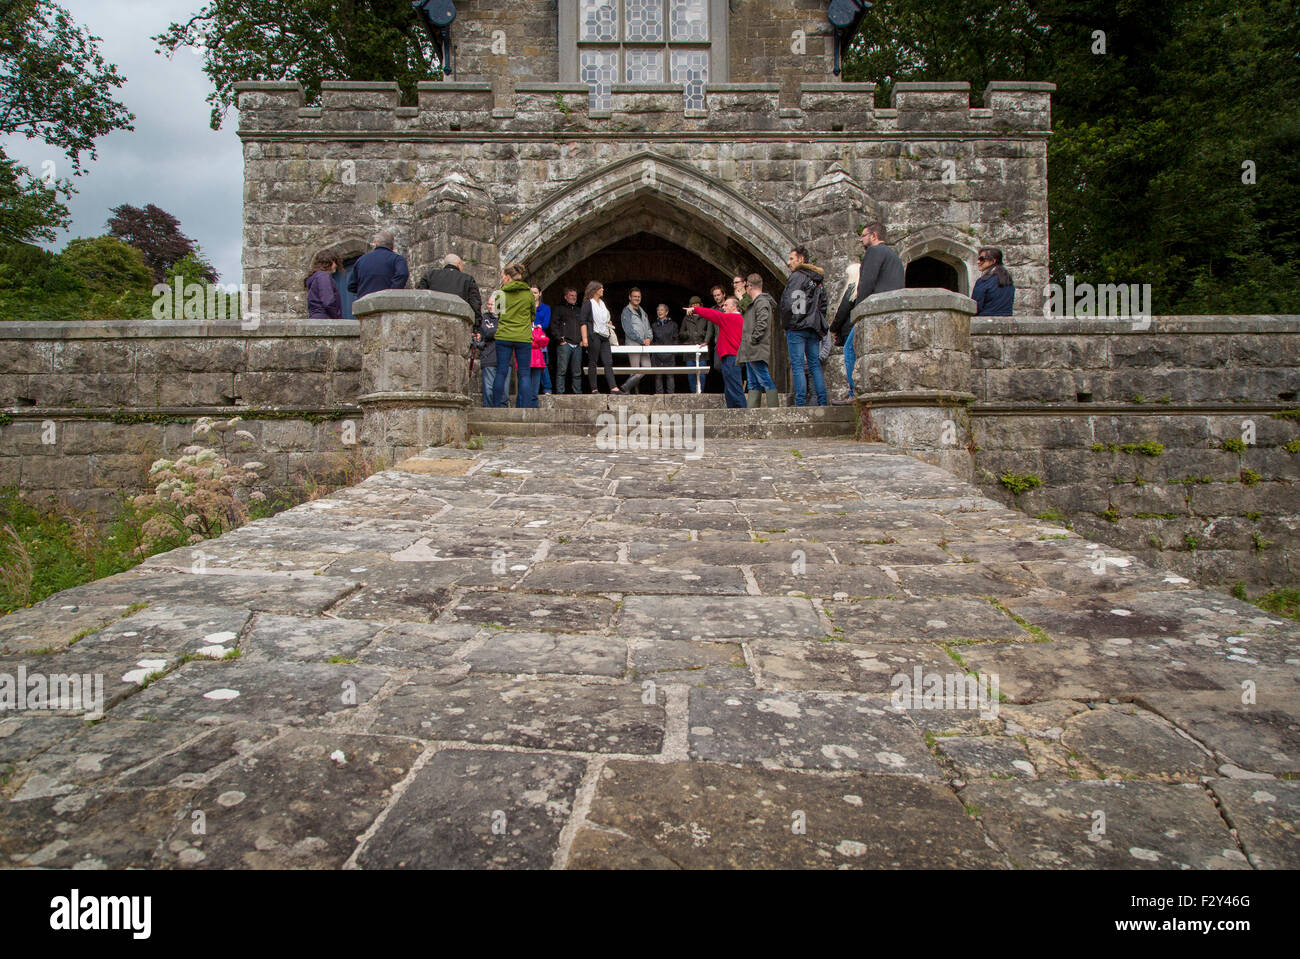 Viscount John Crichton leads a group on a tour of his ancestral home - Crom Castle and Estate, County Fermanagh, Northern Irelan Stock Photo